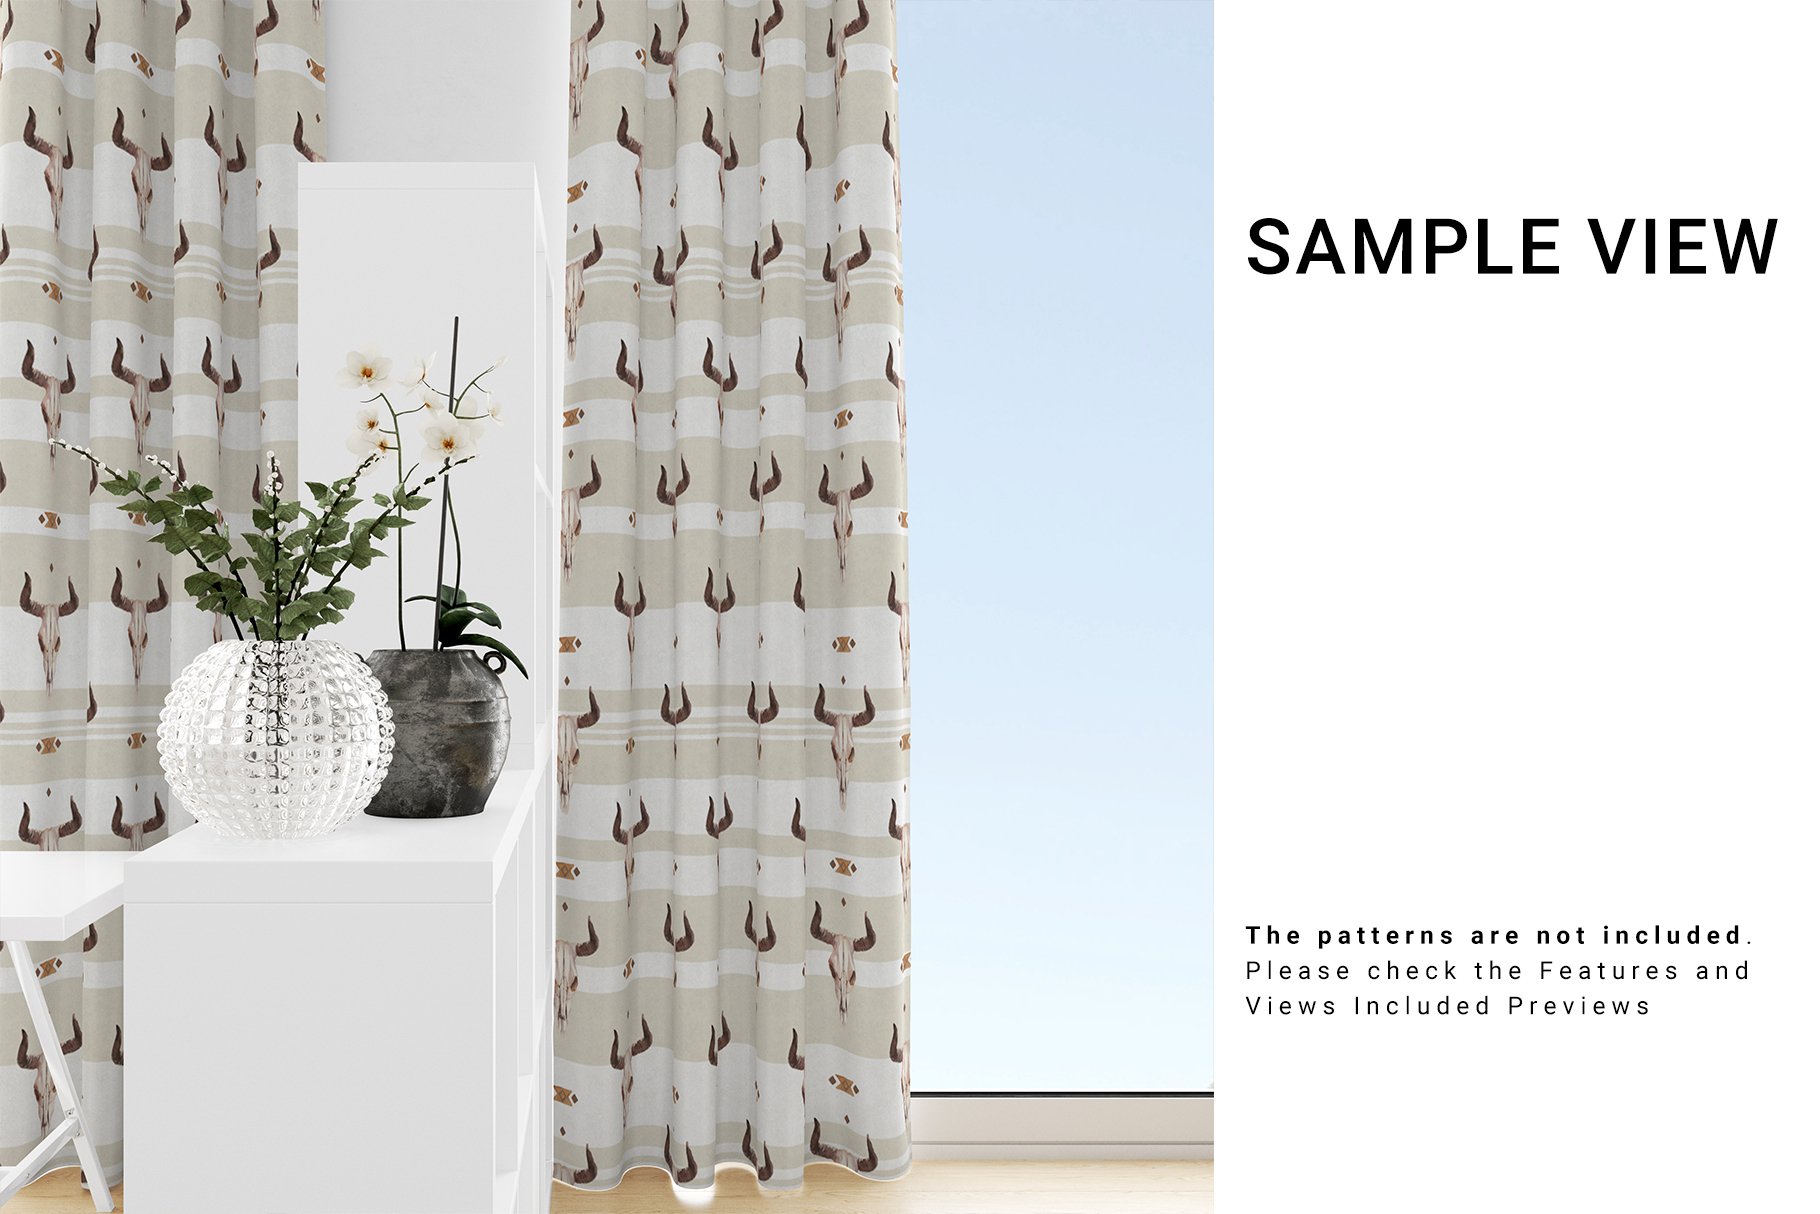 Home Office Textile - Long Curtains Mockup Set